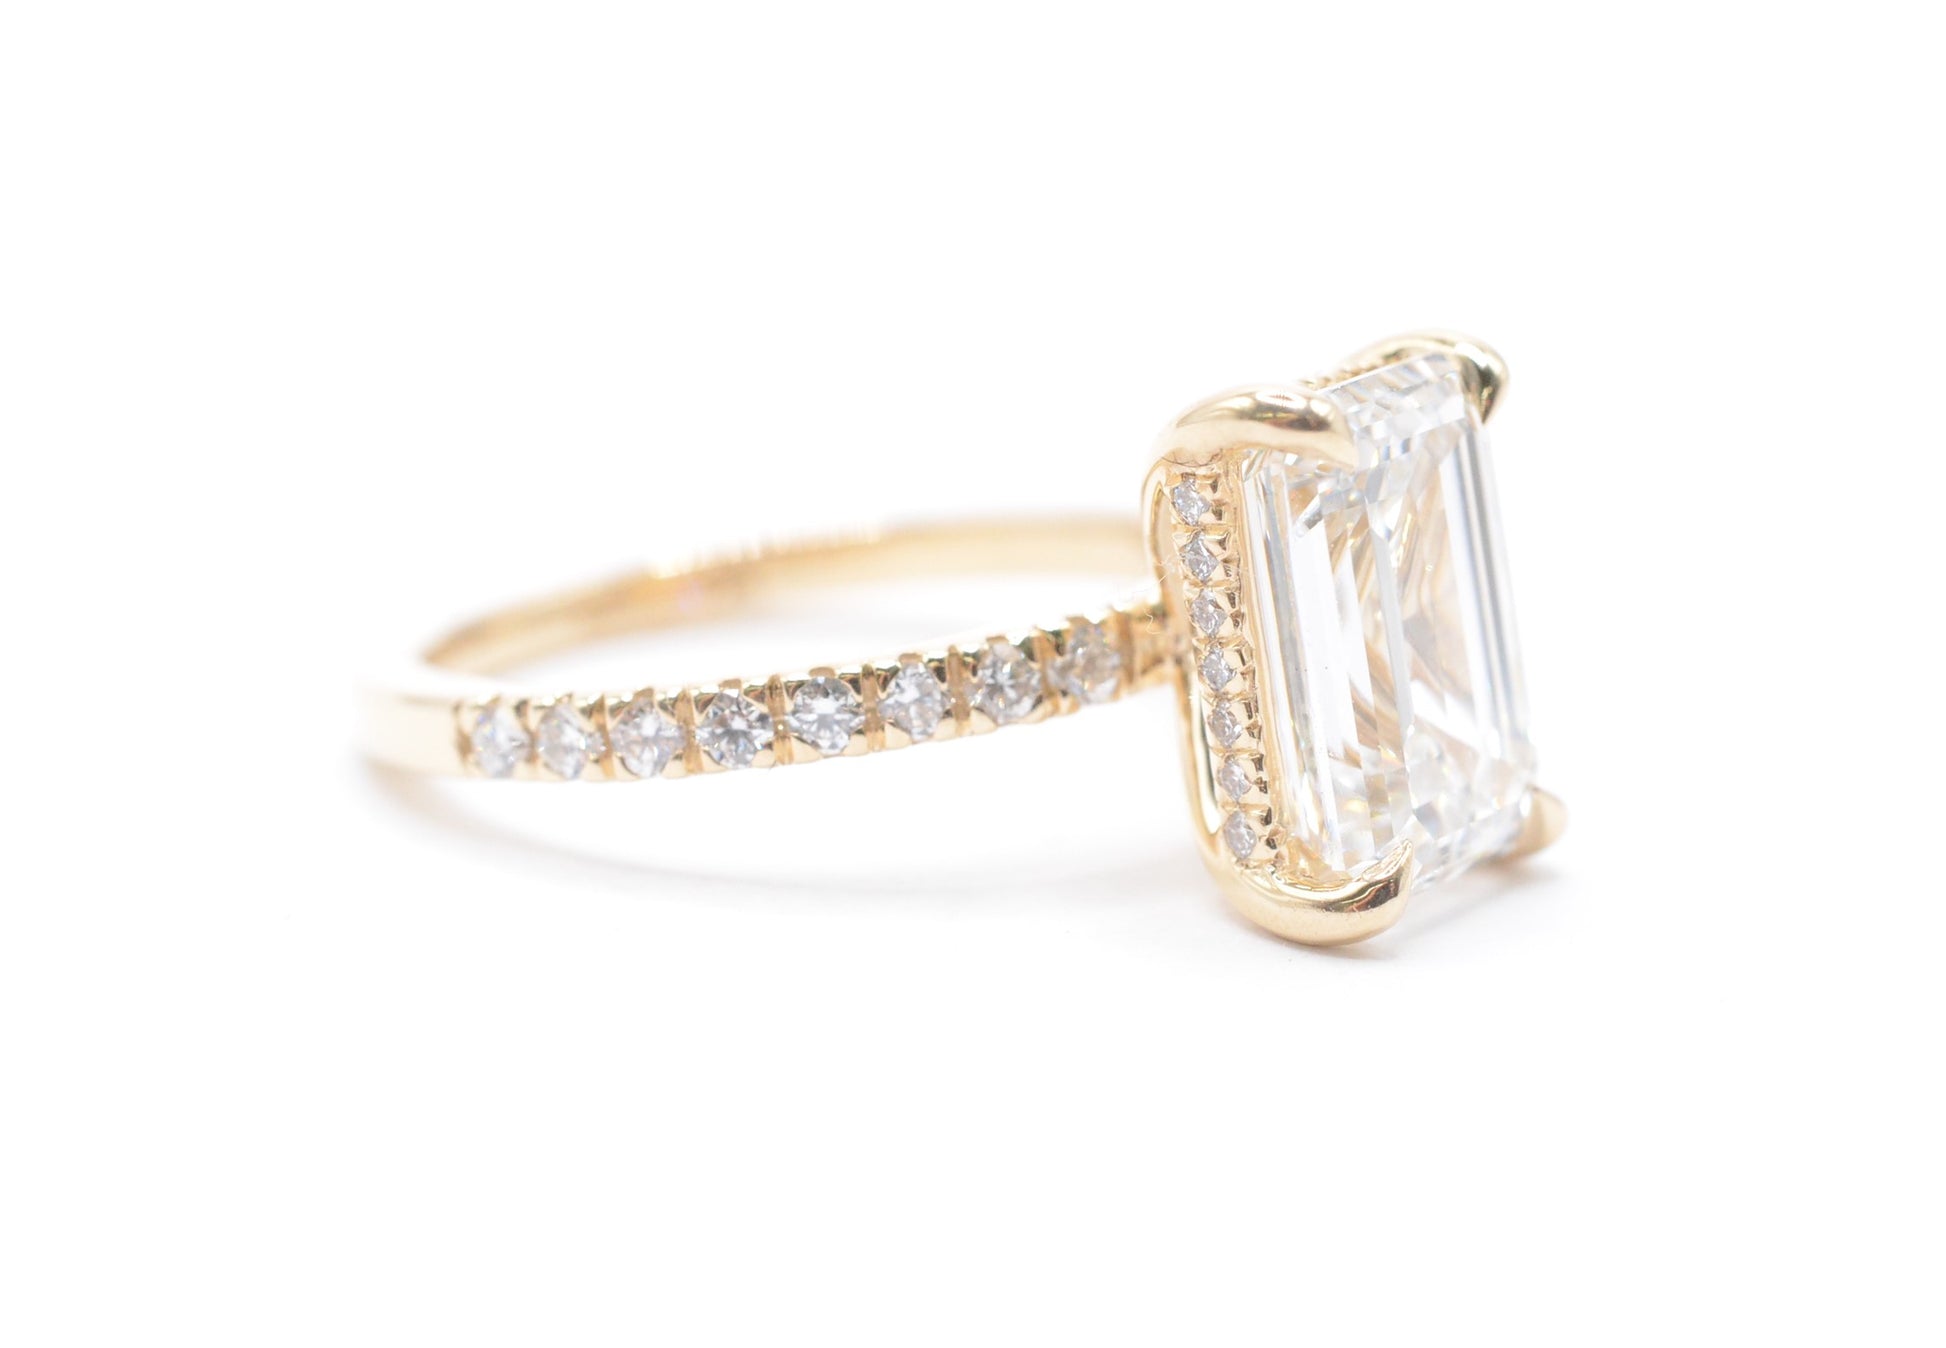 3ct Emerald Cut Lab-Grown Diamond Engagement Ring 14K Yellow Gold Made to Order